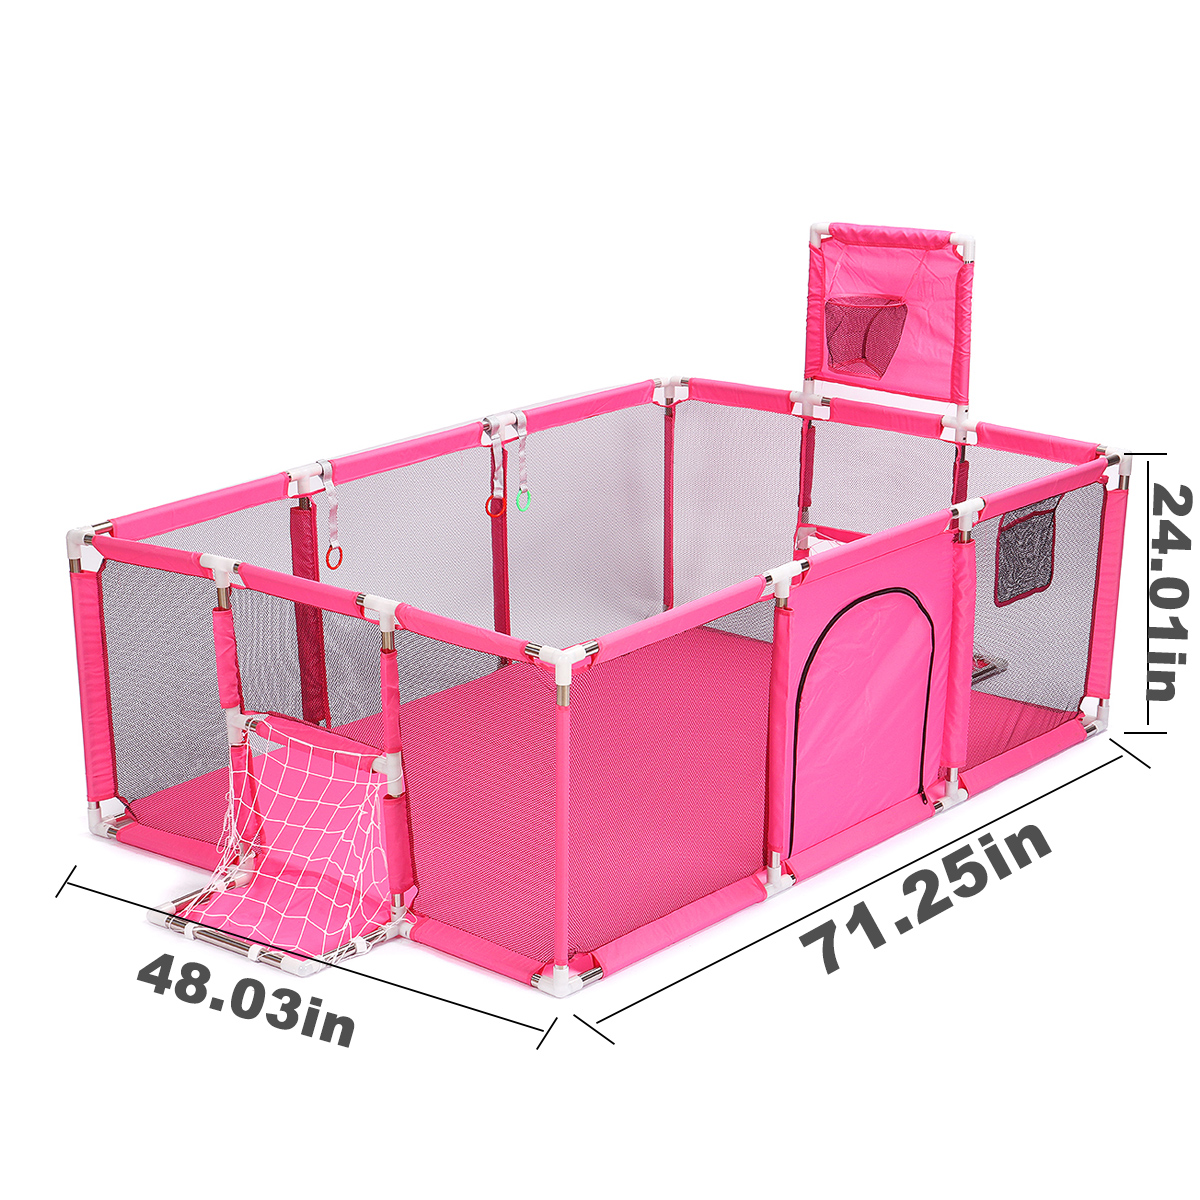 3-in-1-Baby-Playpen-Interactive-Safety-Indoor-Gate-Play-Yards-Tent-Basketball-Court-Kids-Furniture-f-1693785-19